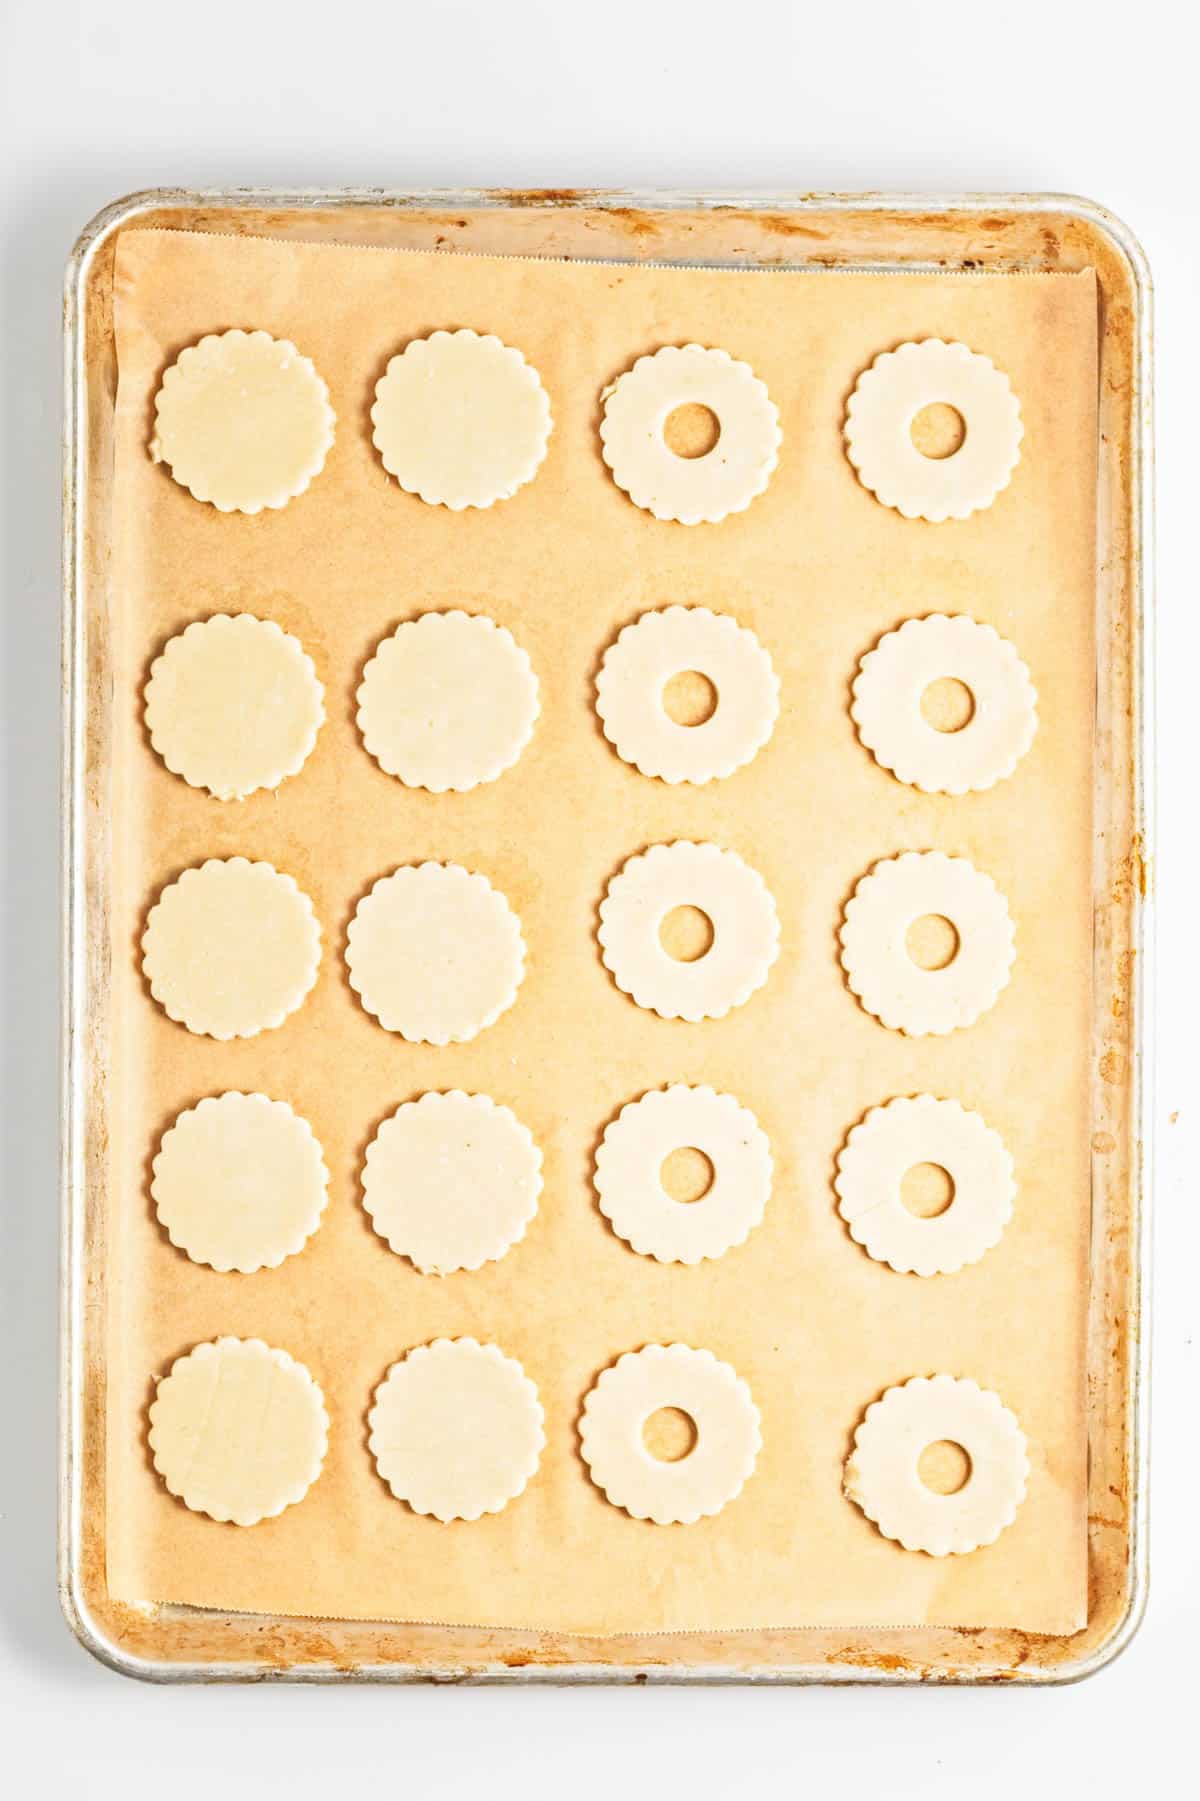 Unbaked cookies on a cookie sheet.